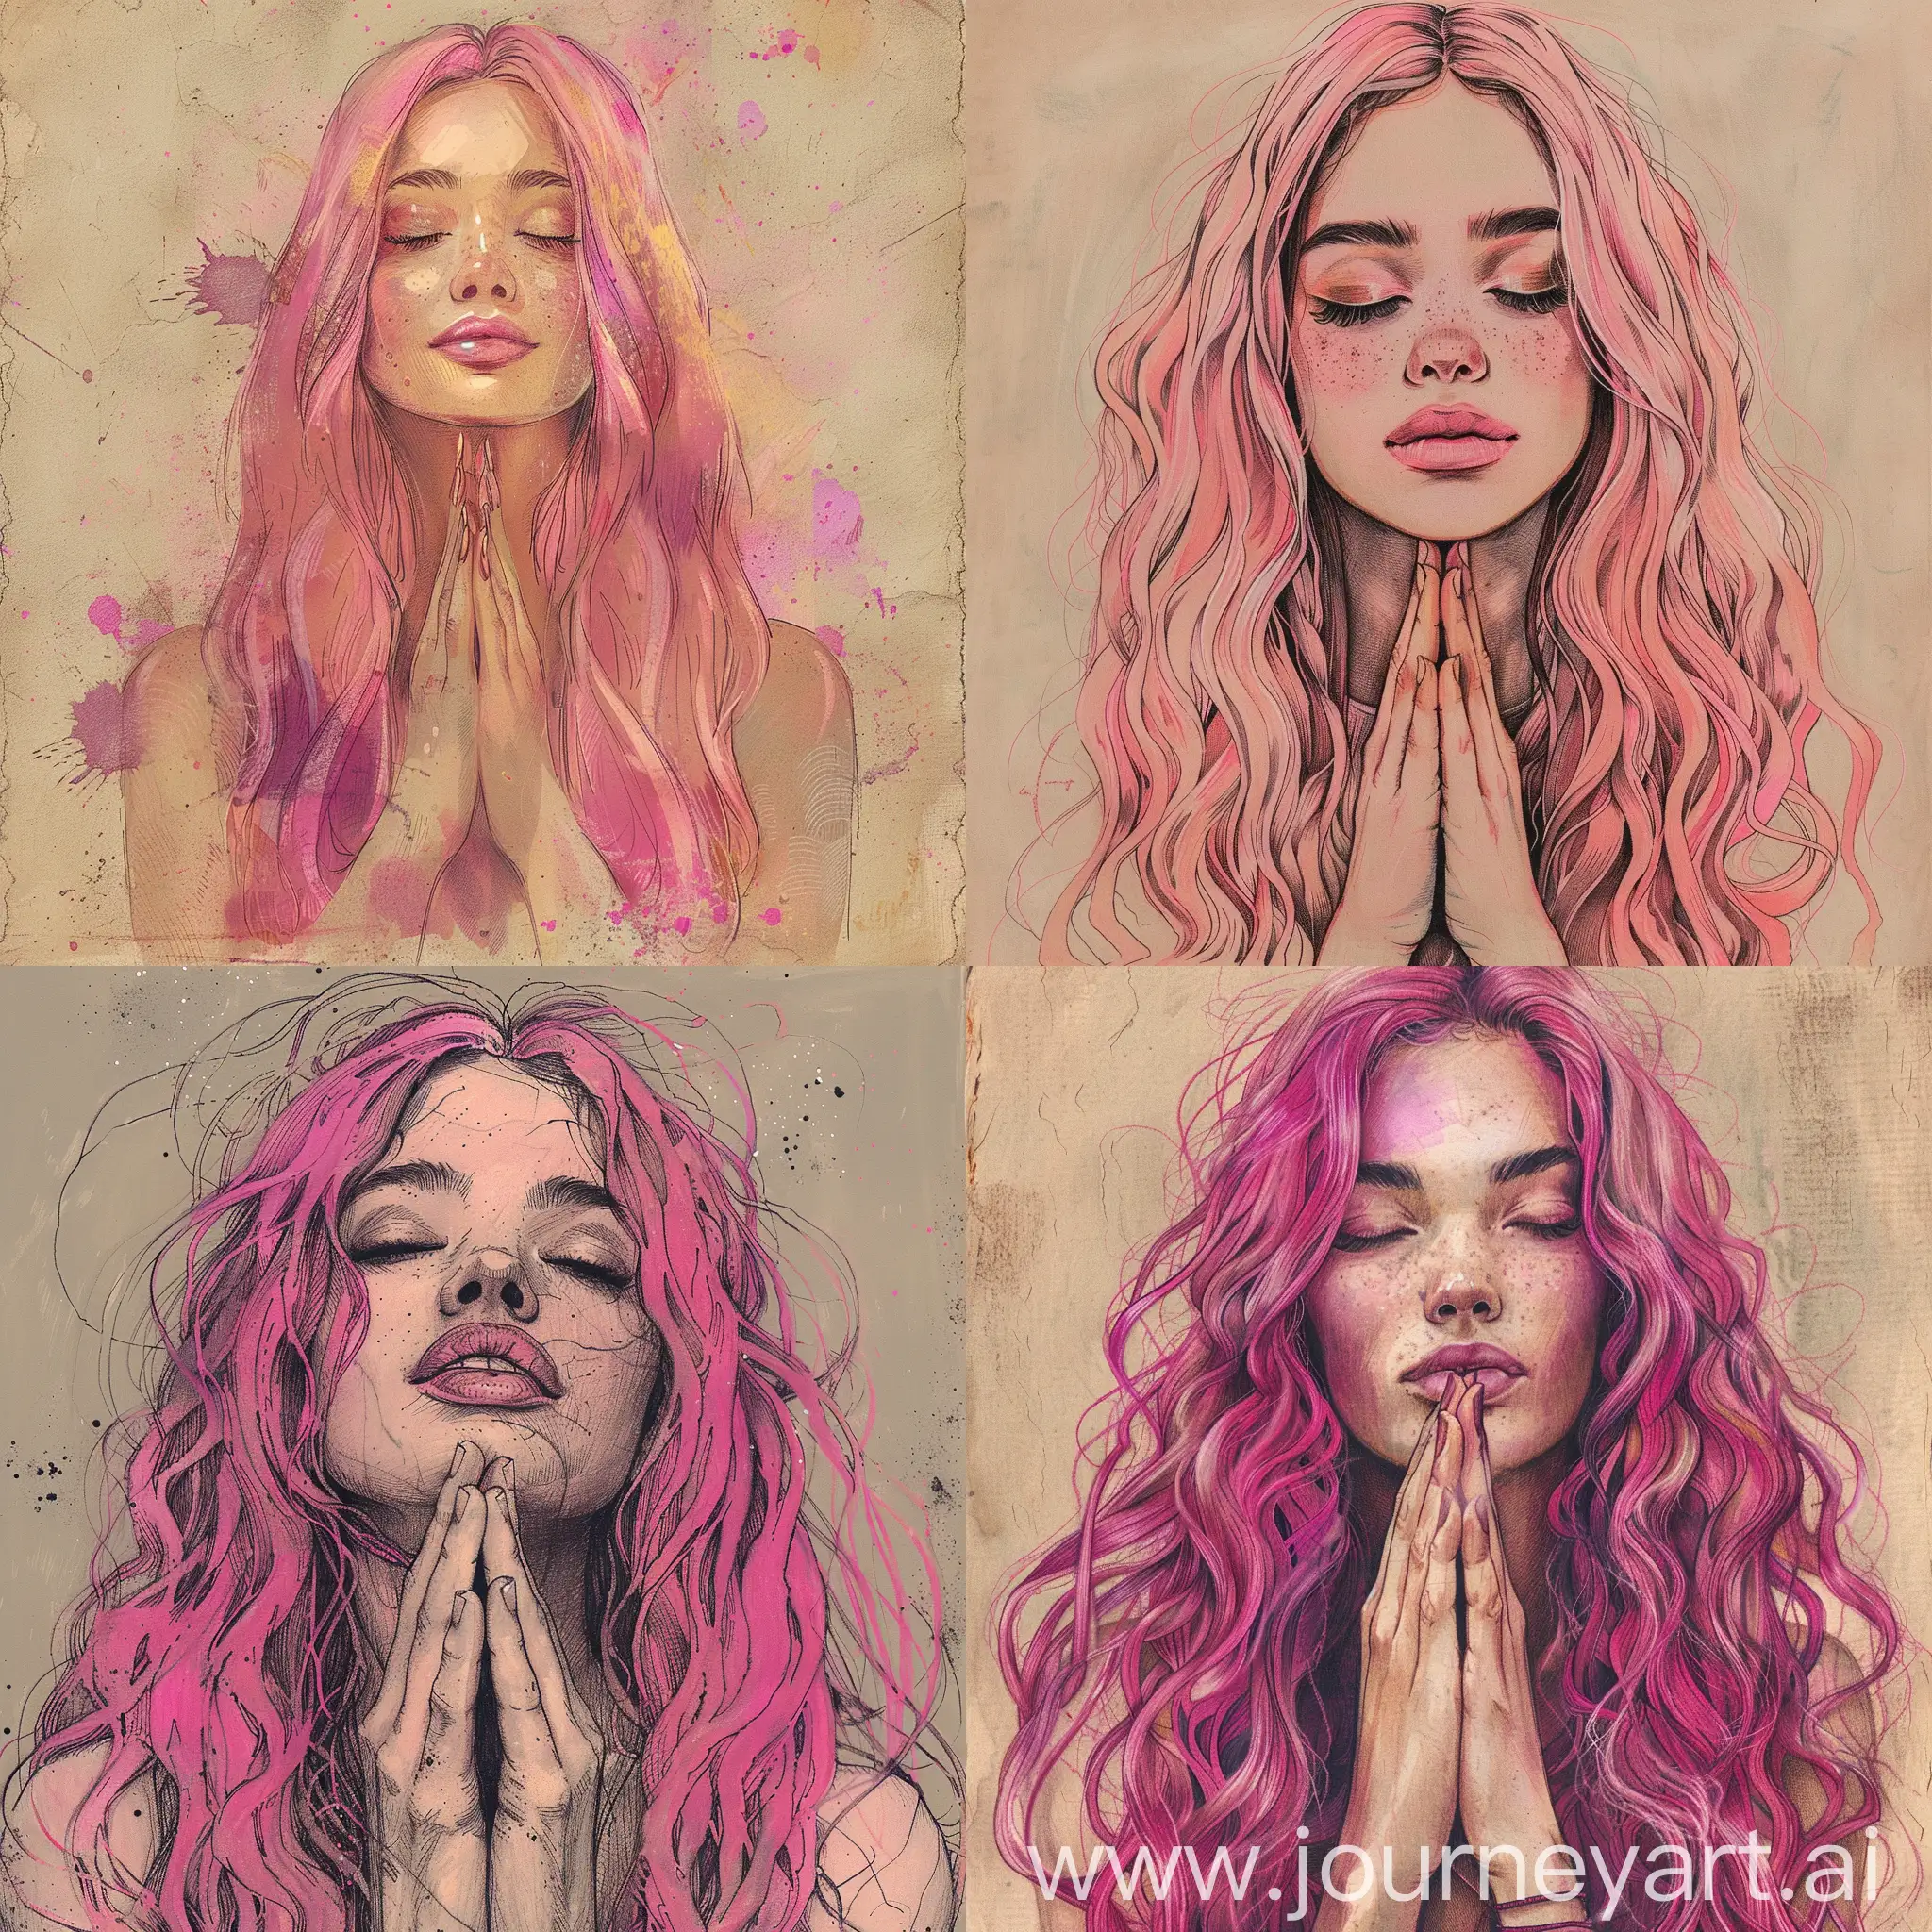 UltraRealistic-Ink-Art-of-a-Meditating-Woman-with-Pink-Hair